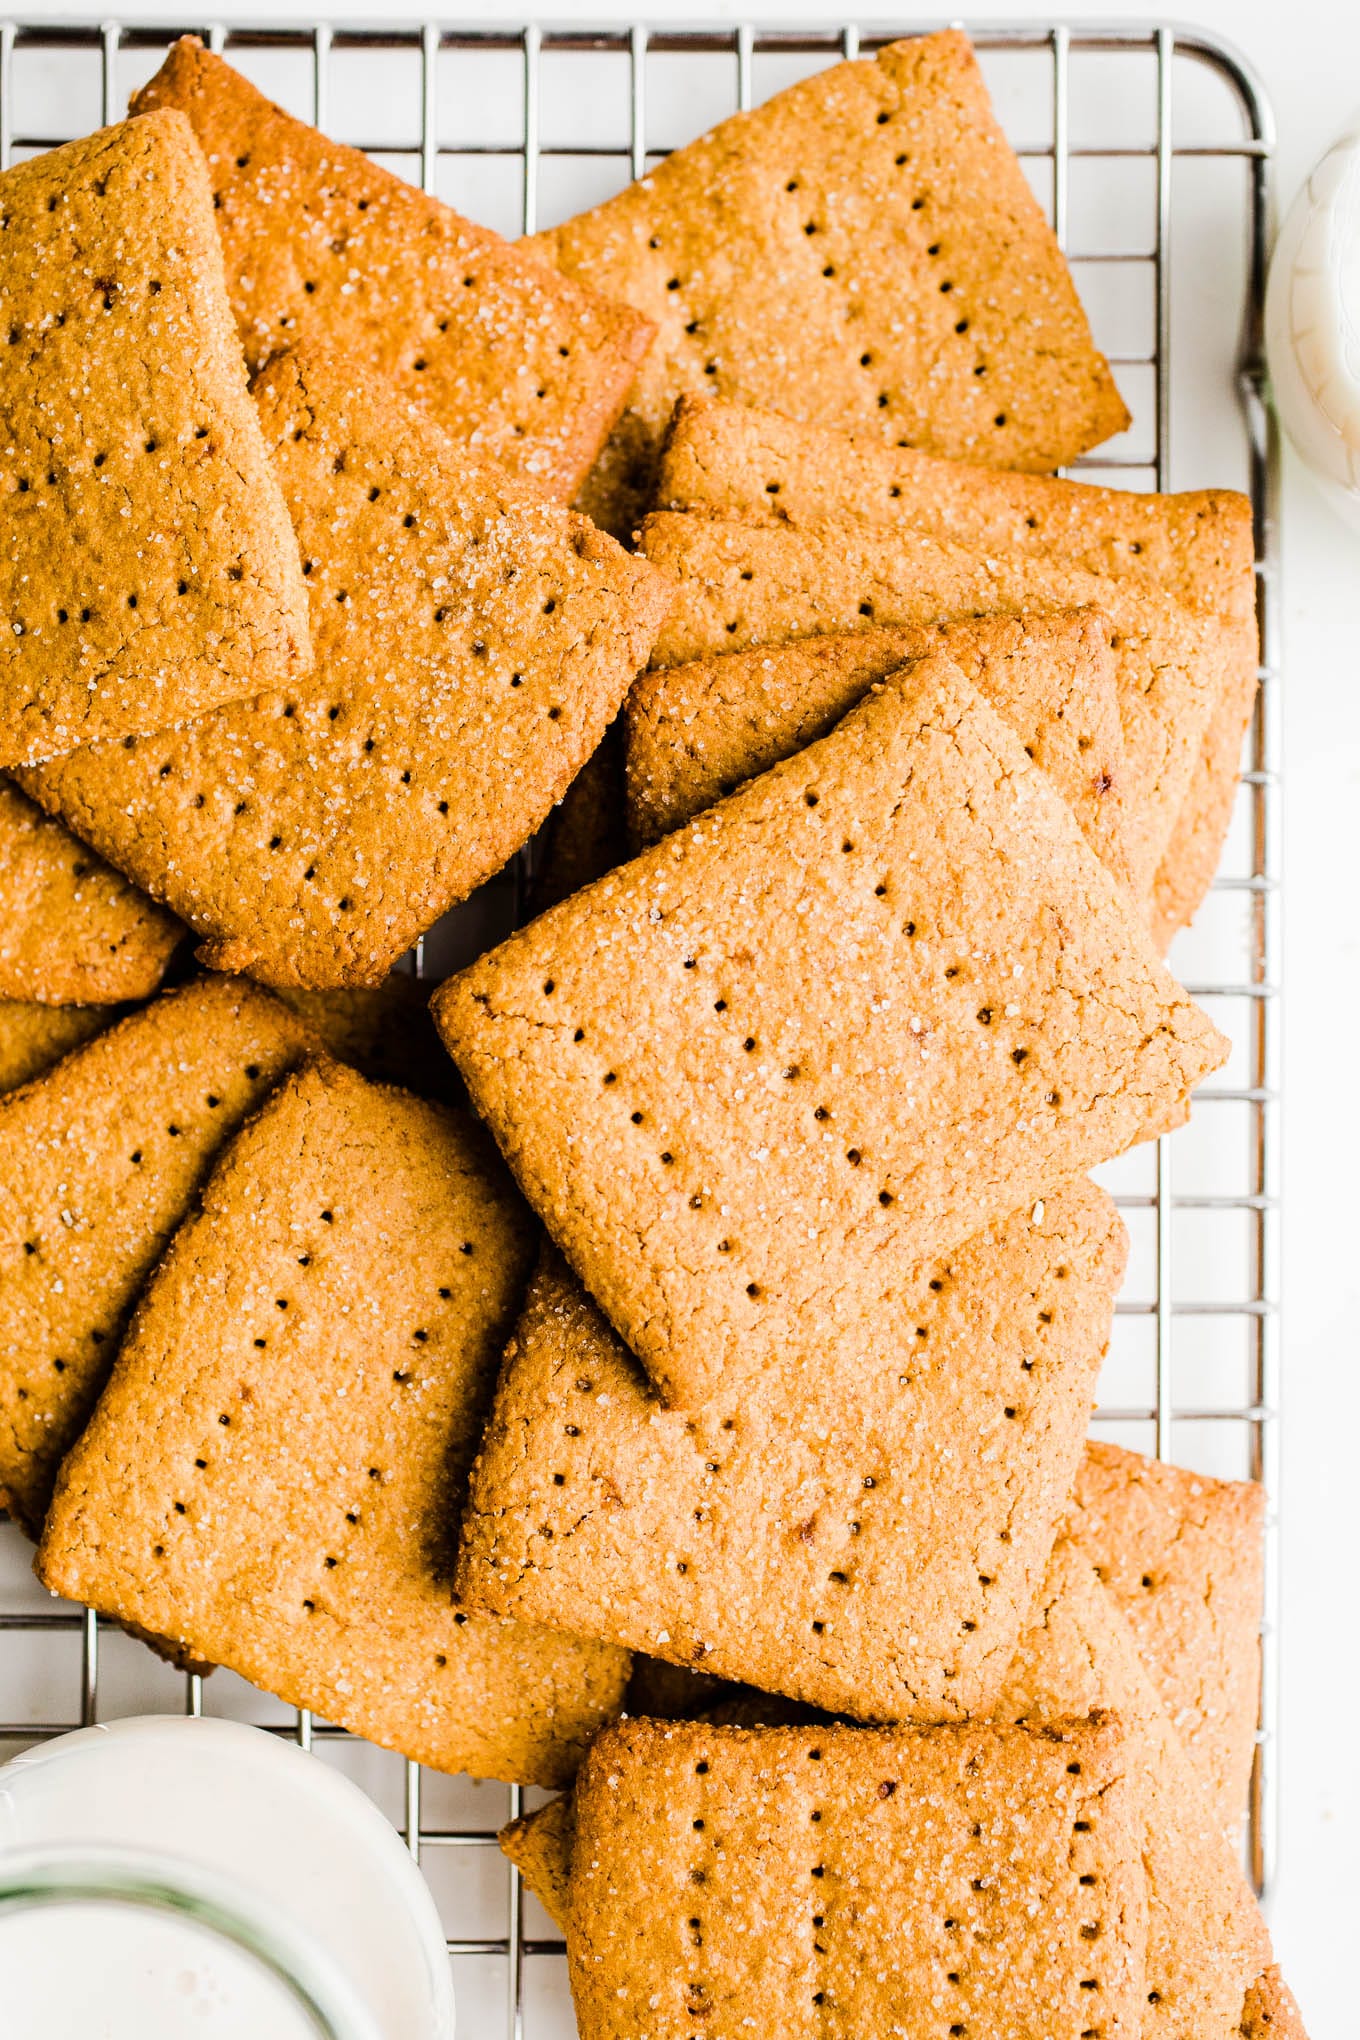 Graham crackers on a cooling rack.